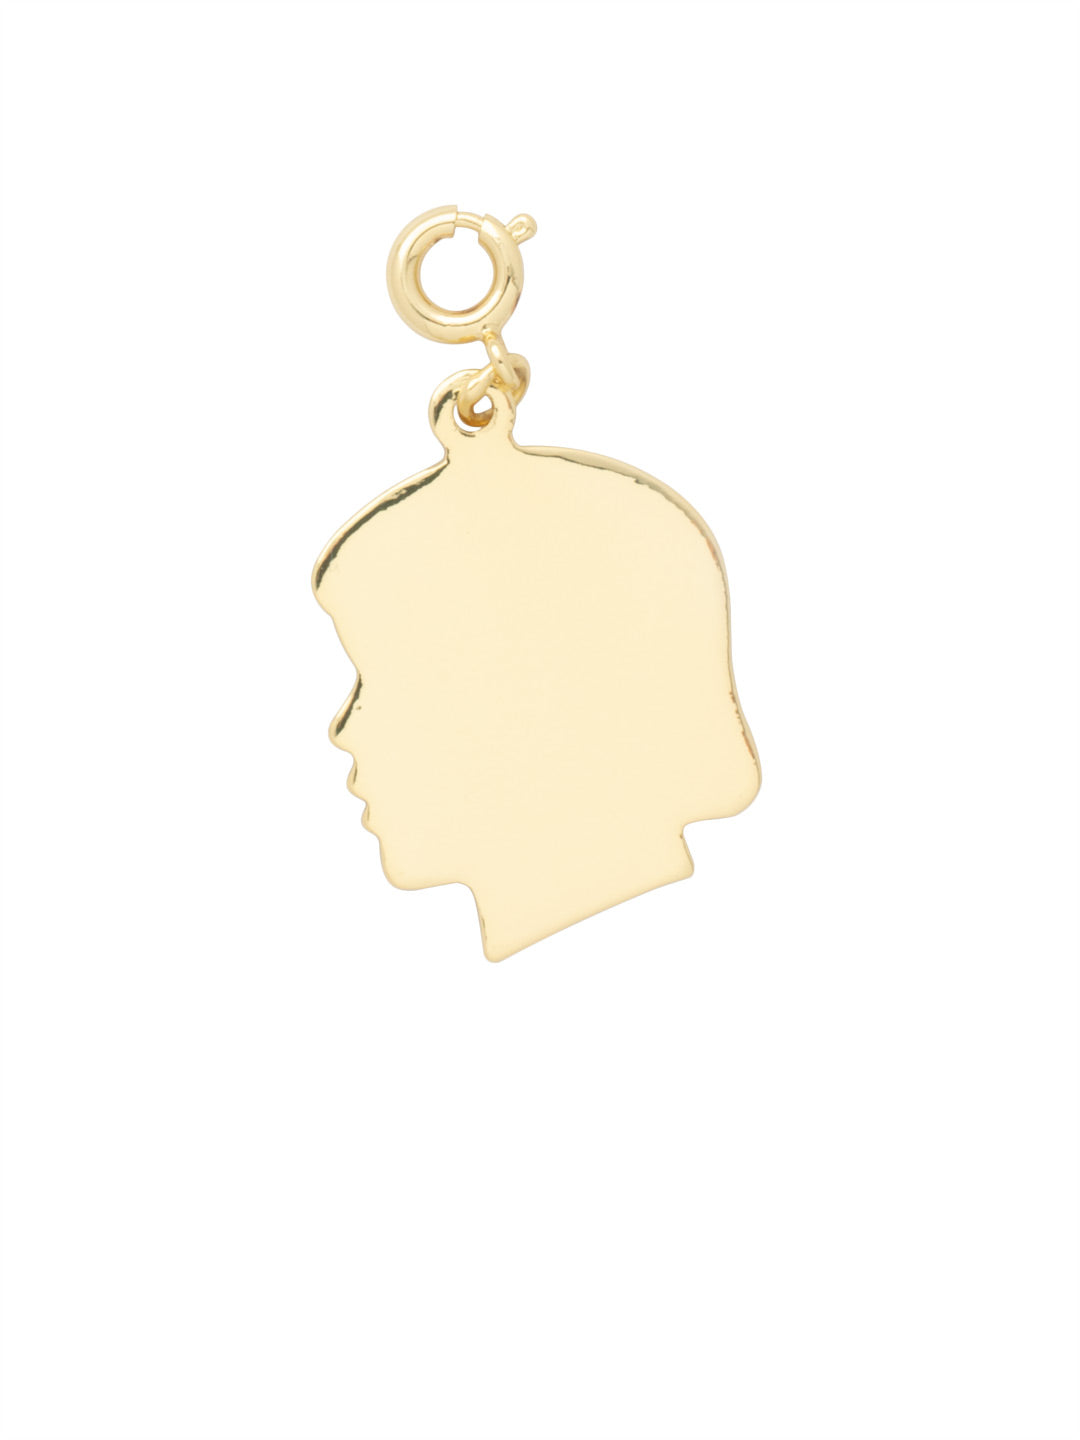 Product Image: Girl Silhouette Charm